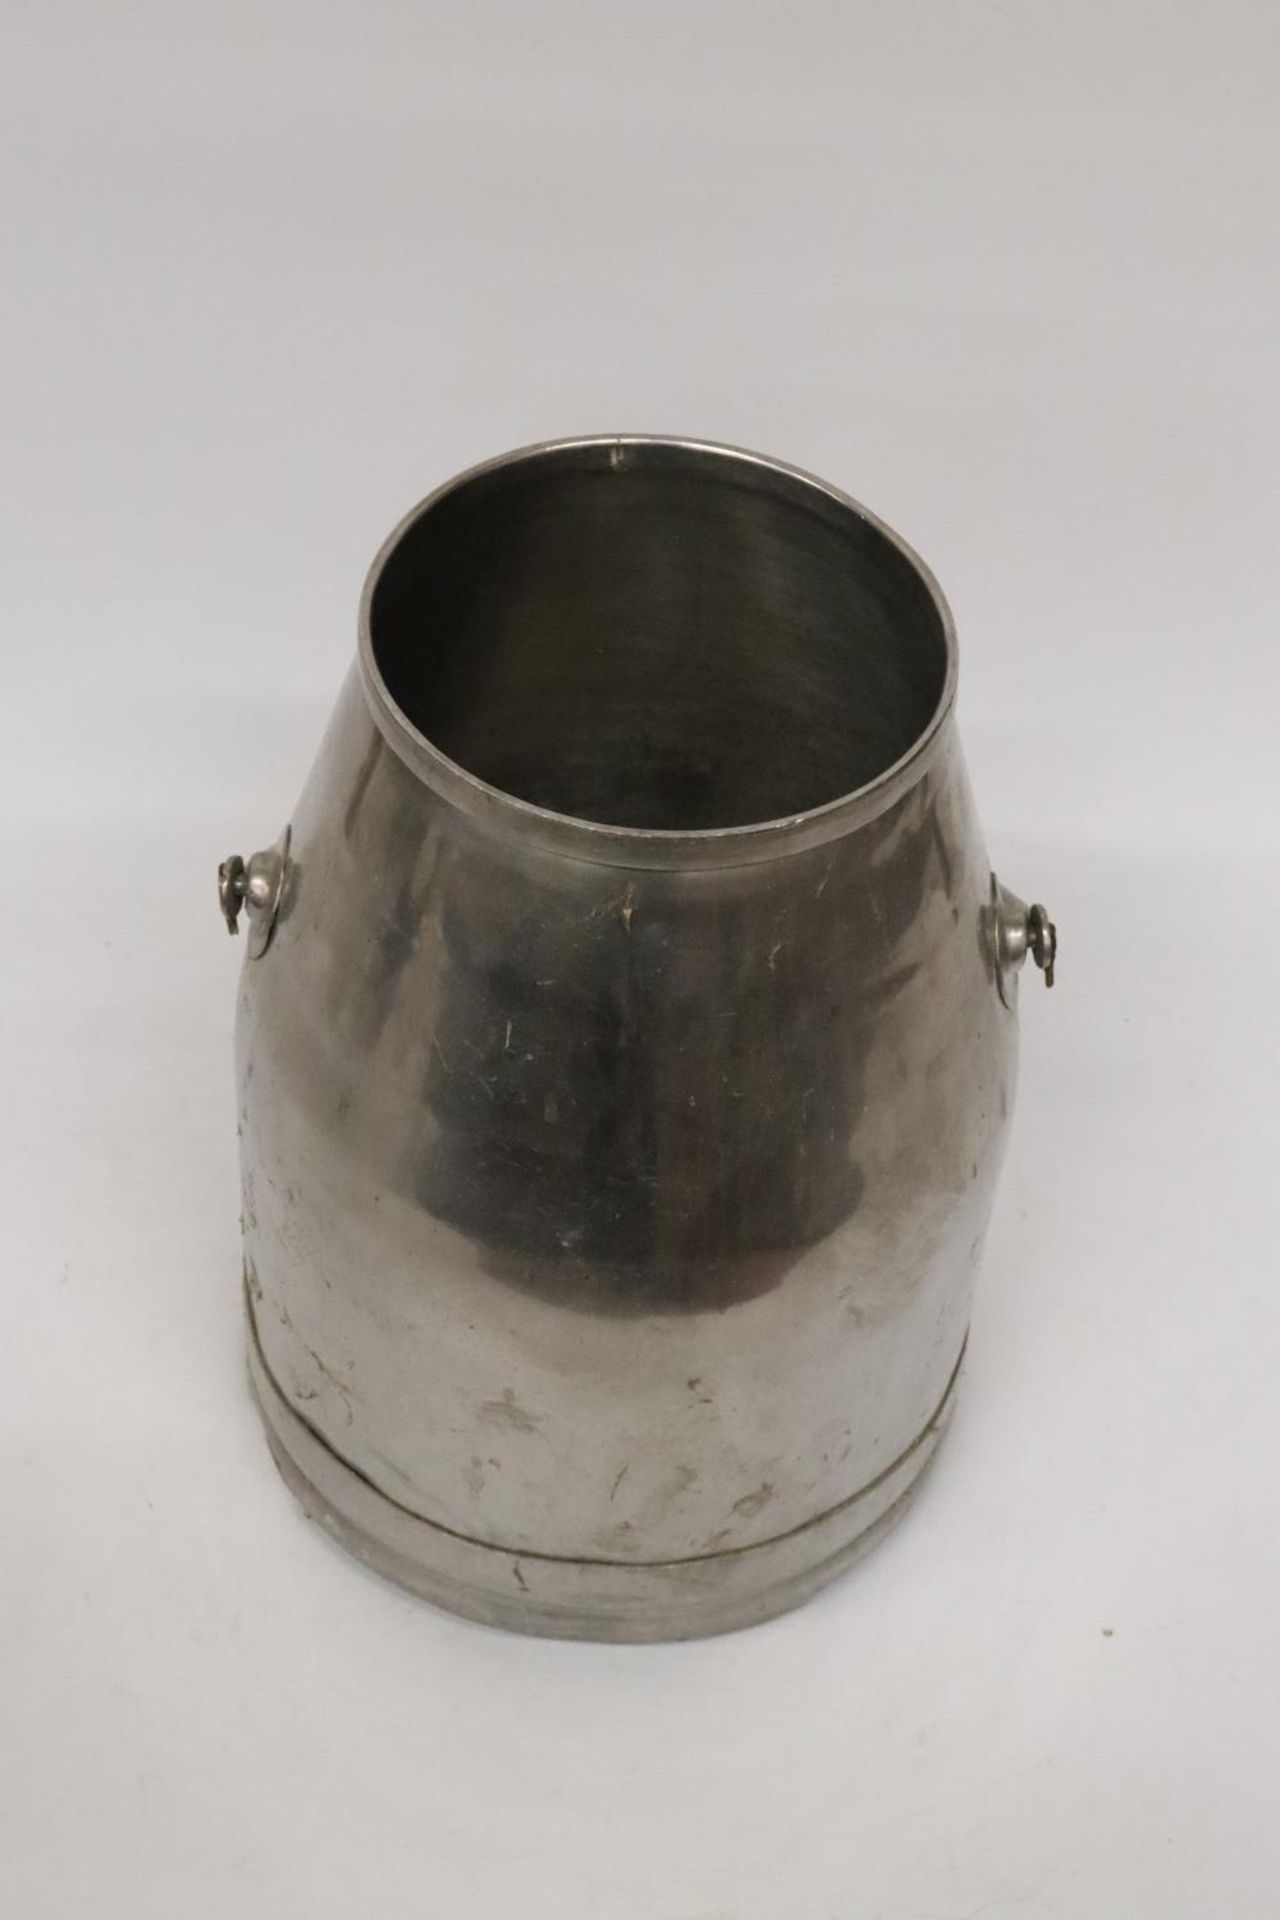 A STAINLESS STEEL MILK CHURN, HEIGHT APPROX 40CM - Image 4 of 4